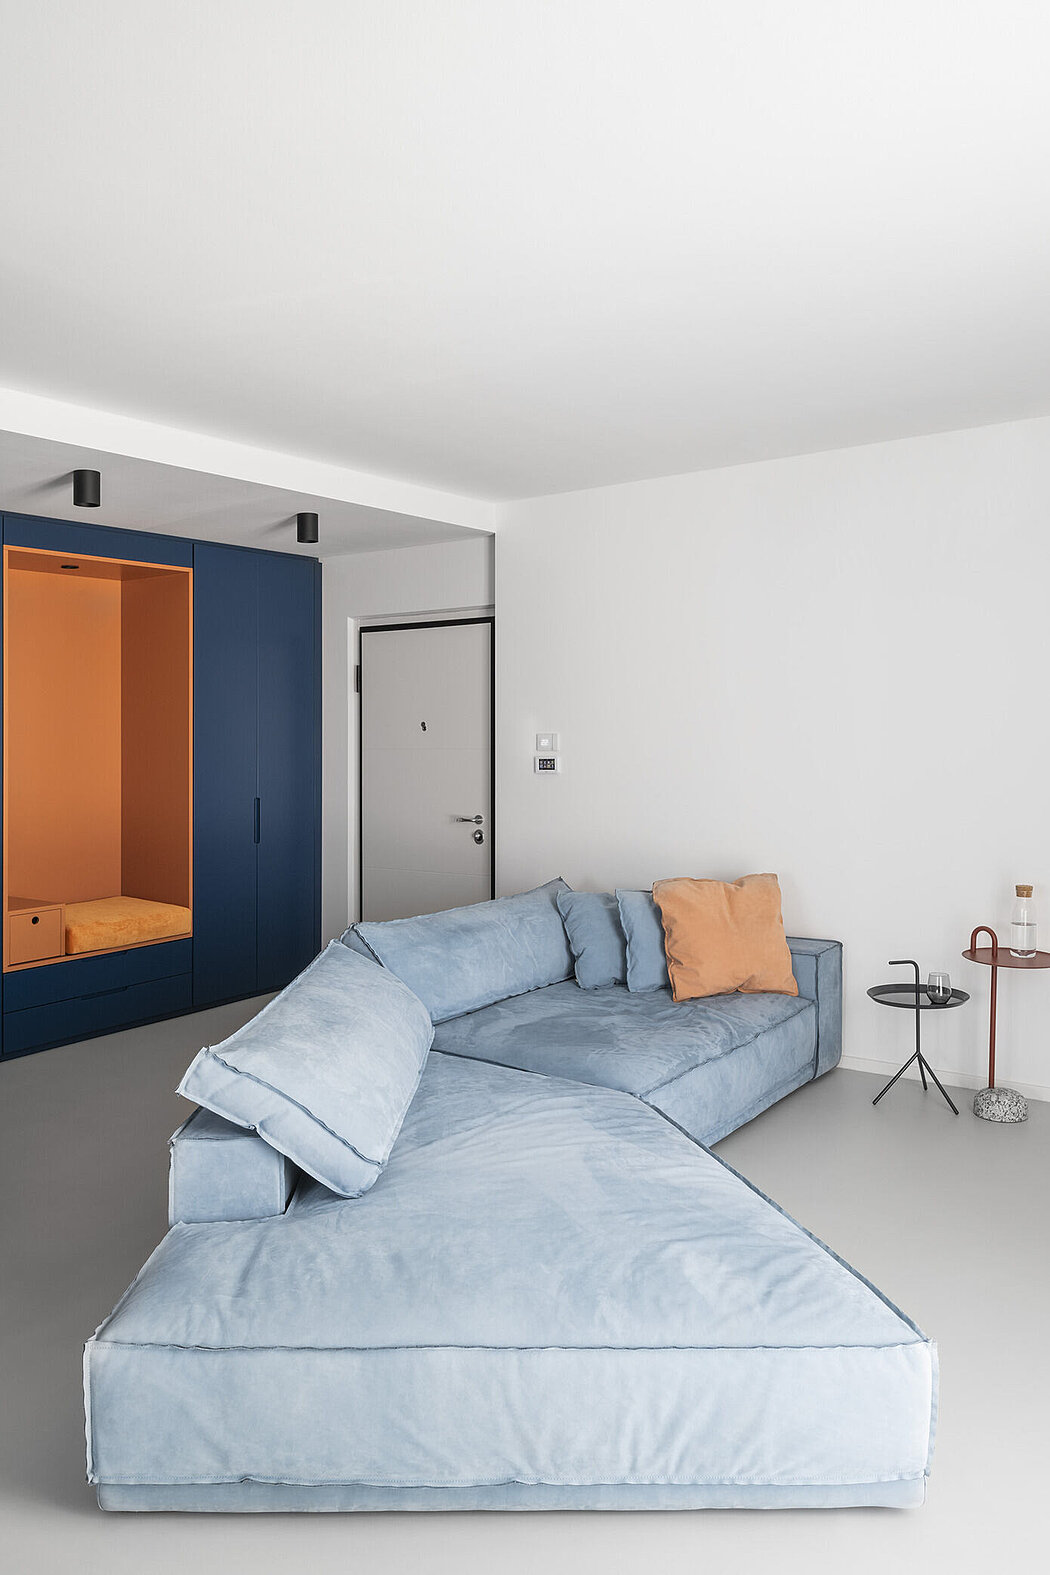 Spina-Dorsale: A Pioneering Apartment Renovation in Bovolone - 1